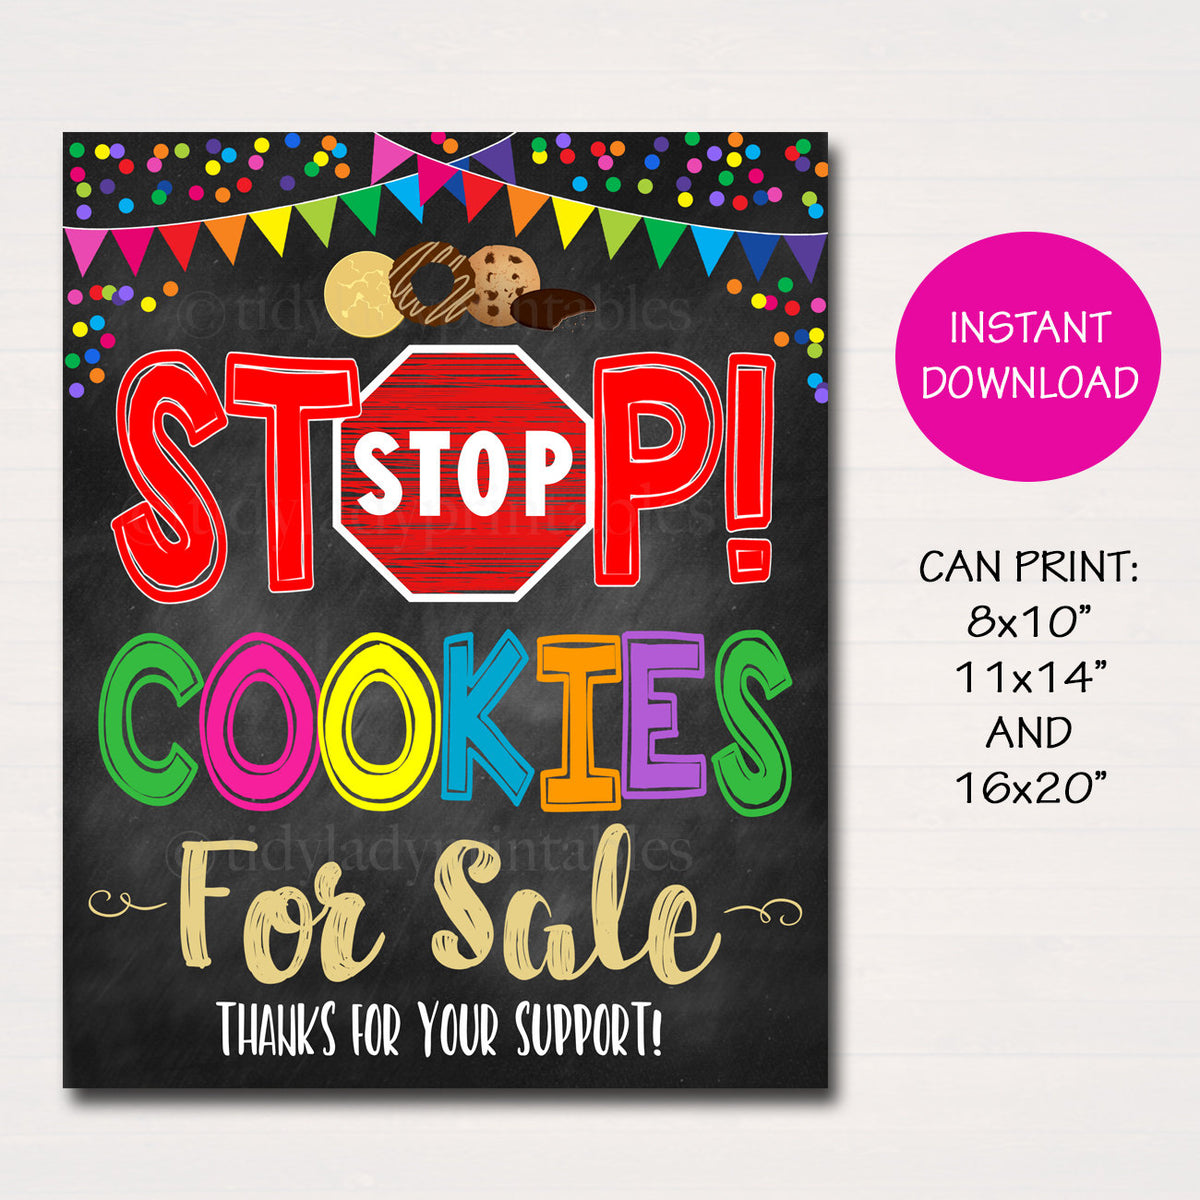 Cookie Booth Ideas, Decor, and Signs TidyLady Printables